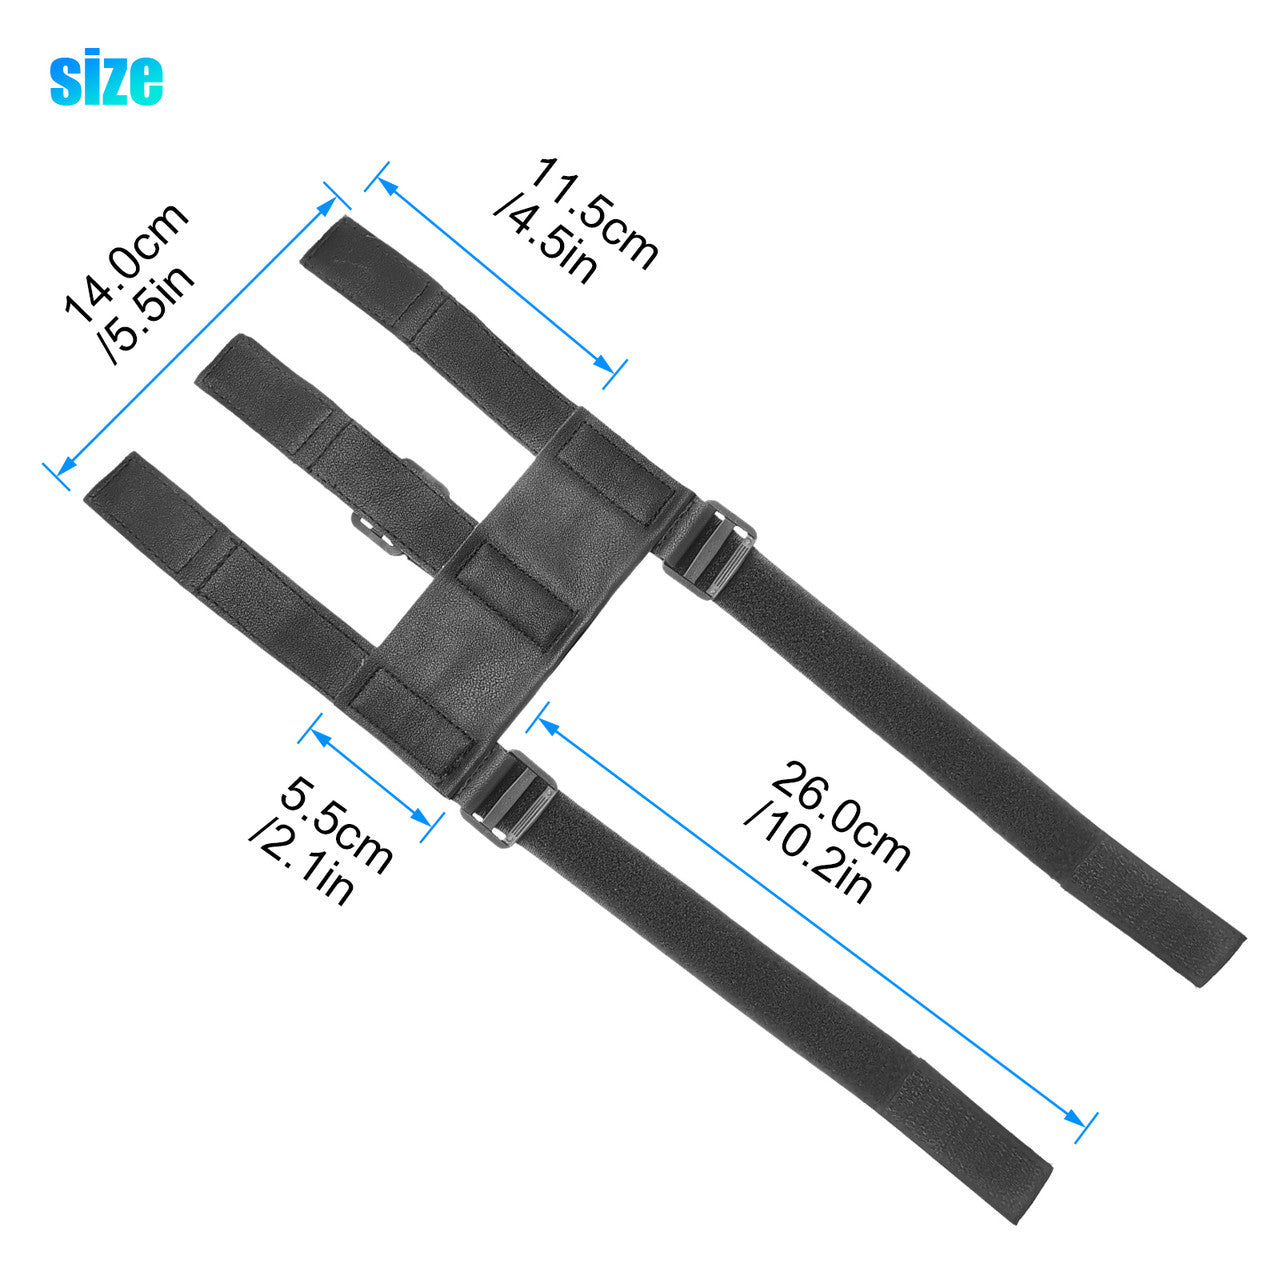 Bluetooth Audio Strap for Various Bluetooth Devices